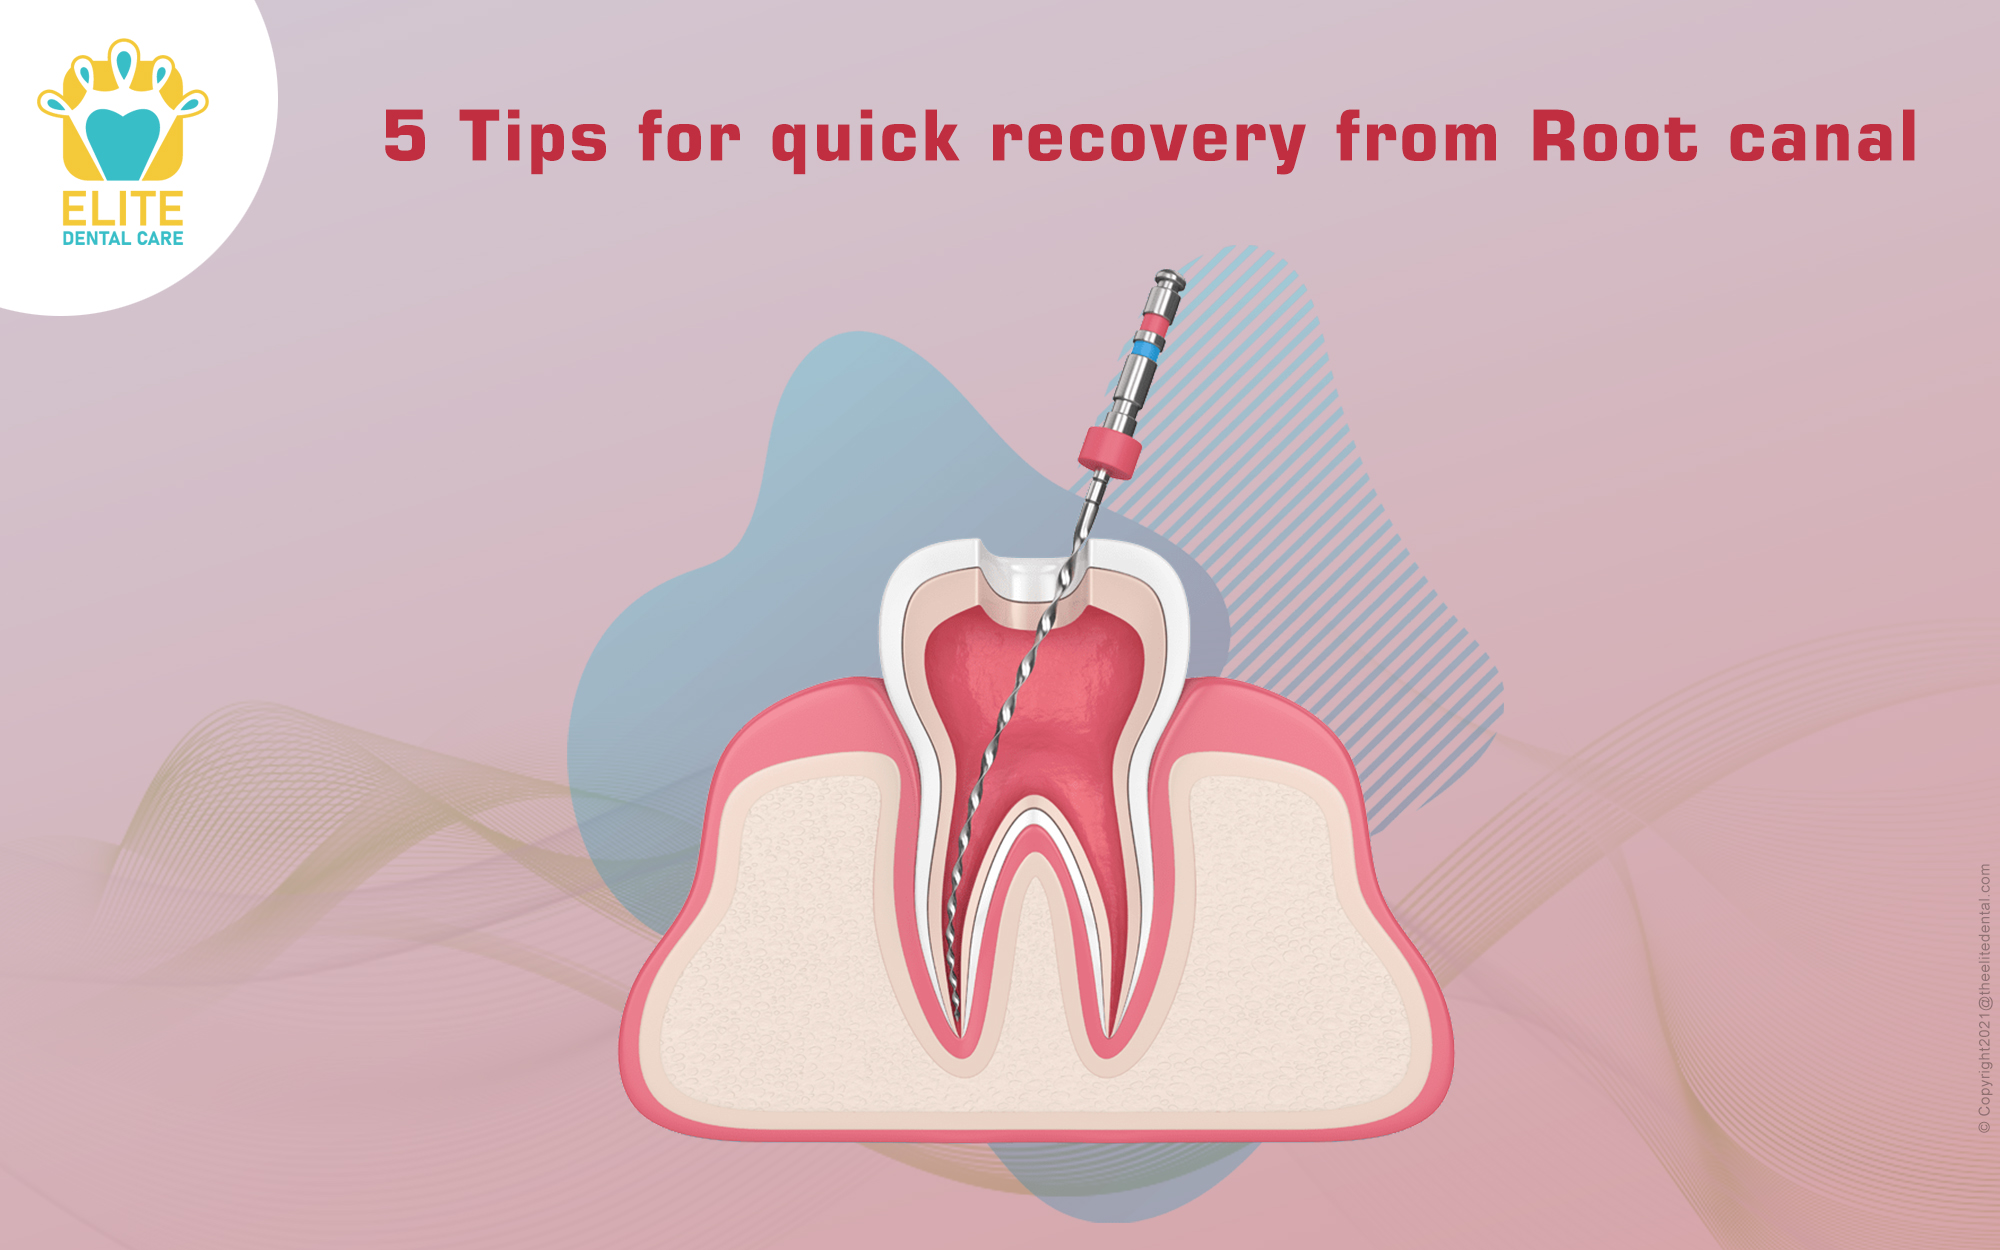 5 TIPS TO SPEED UP ROOT CANAL RECOVERY